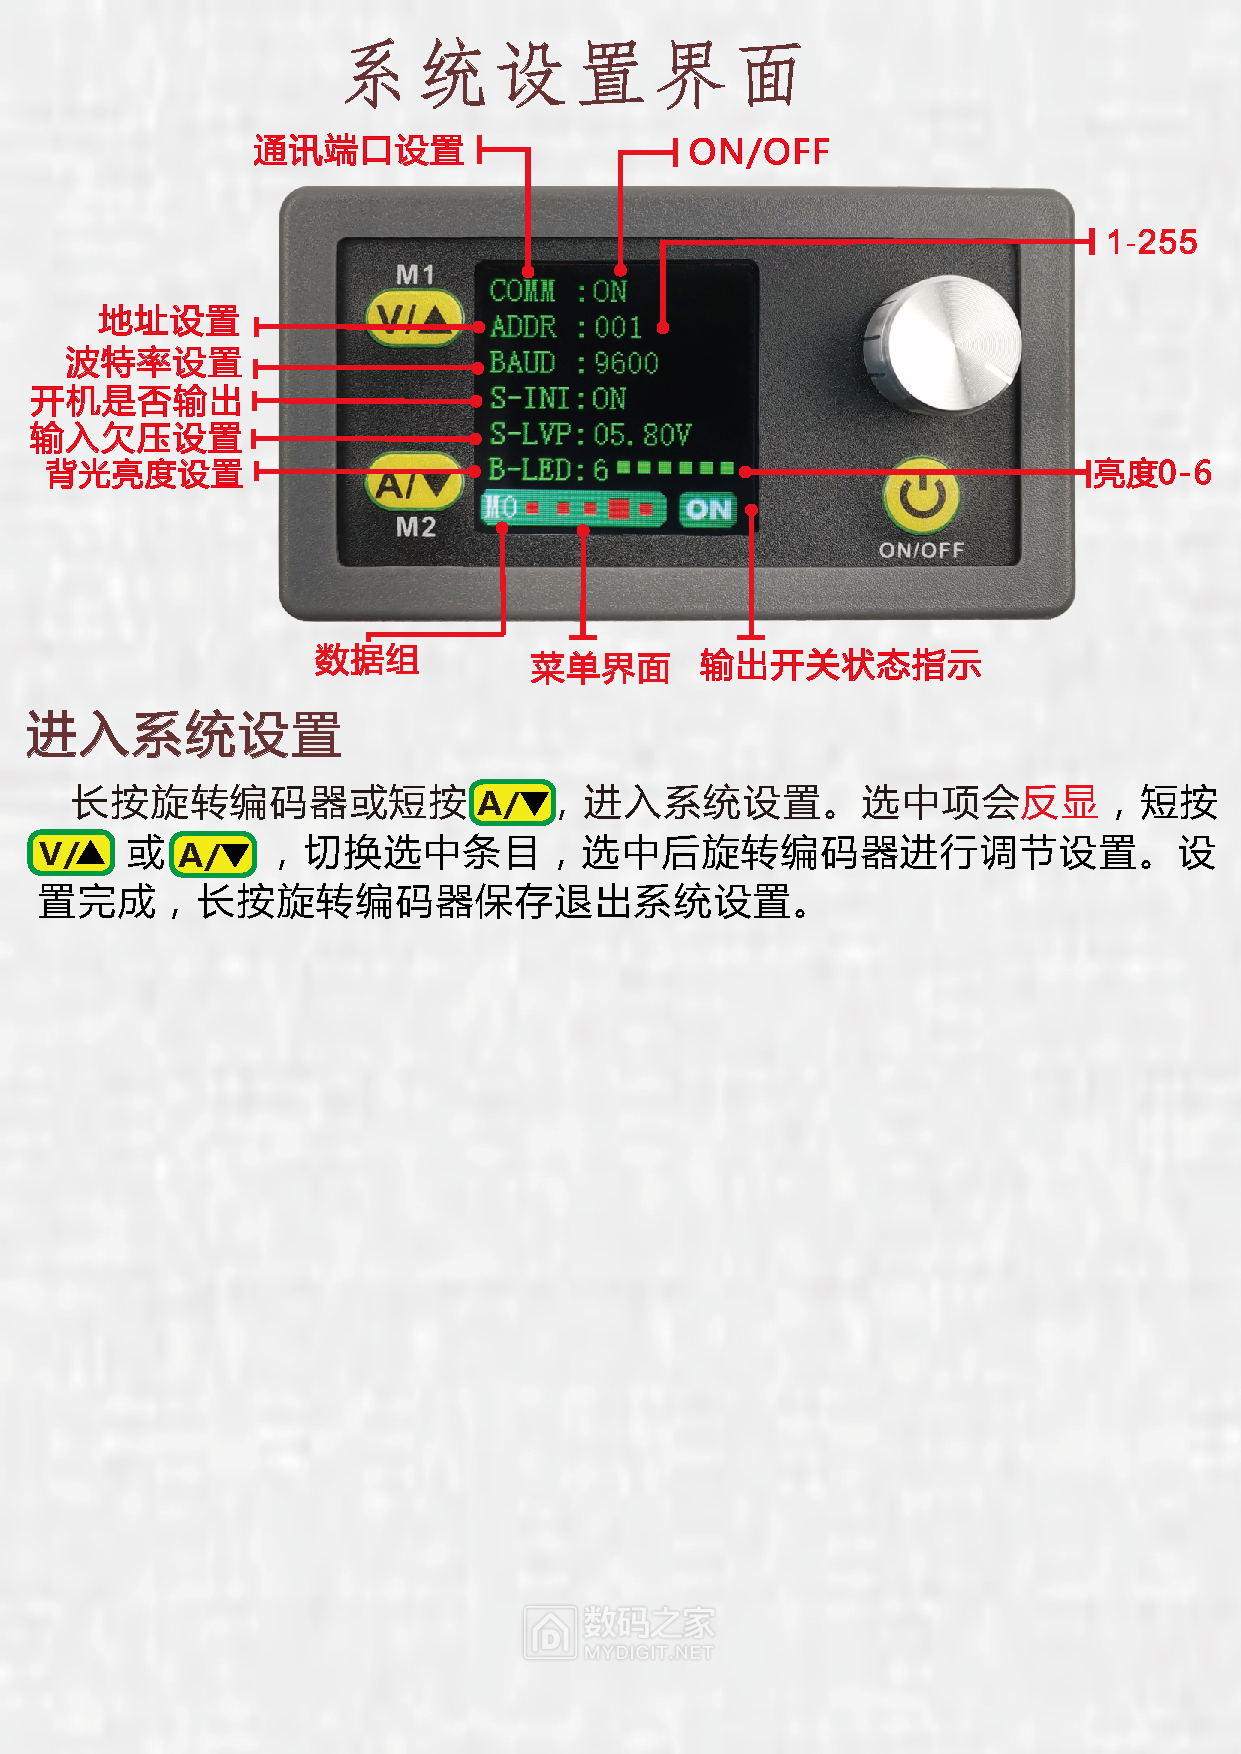 WZ5005E中文说明书_页面_09.png